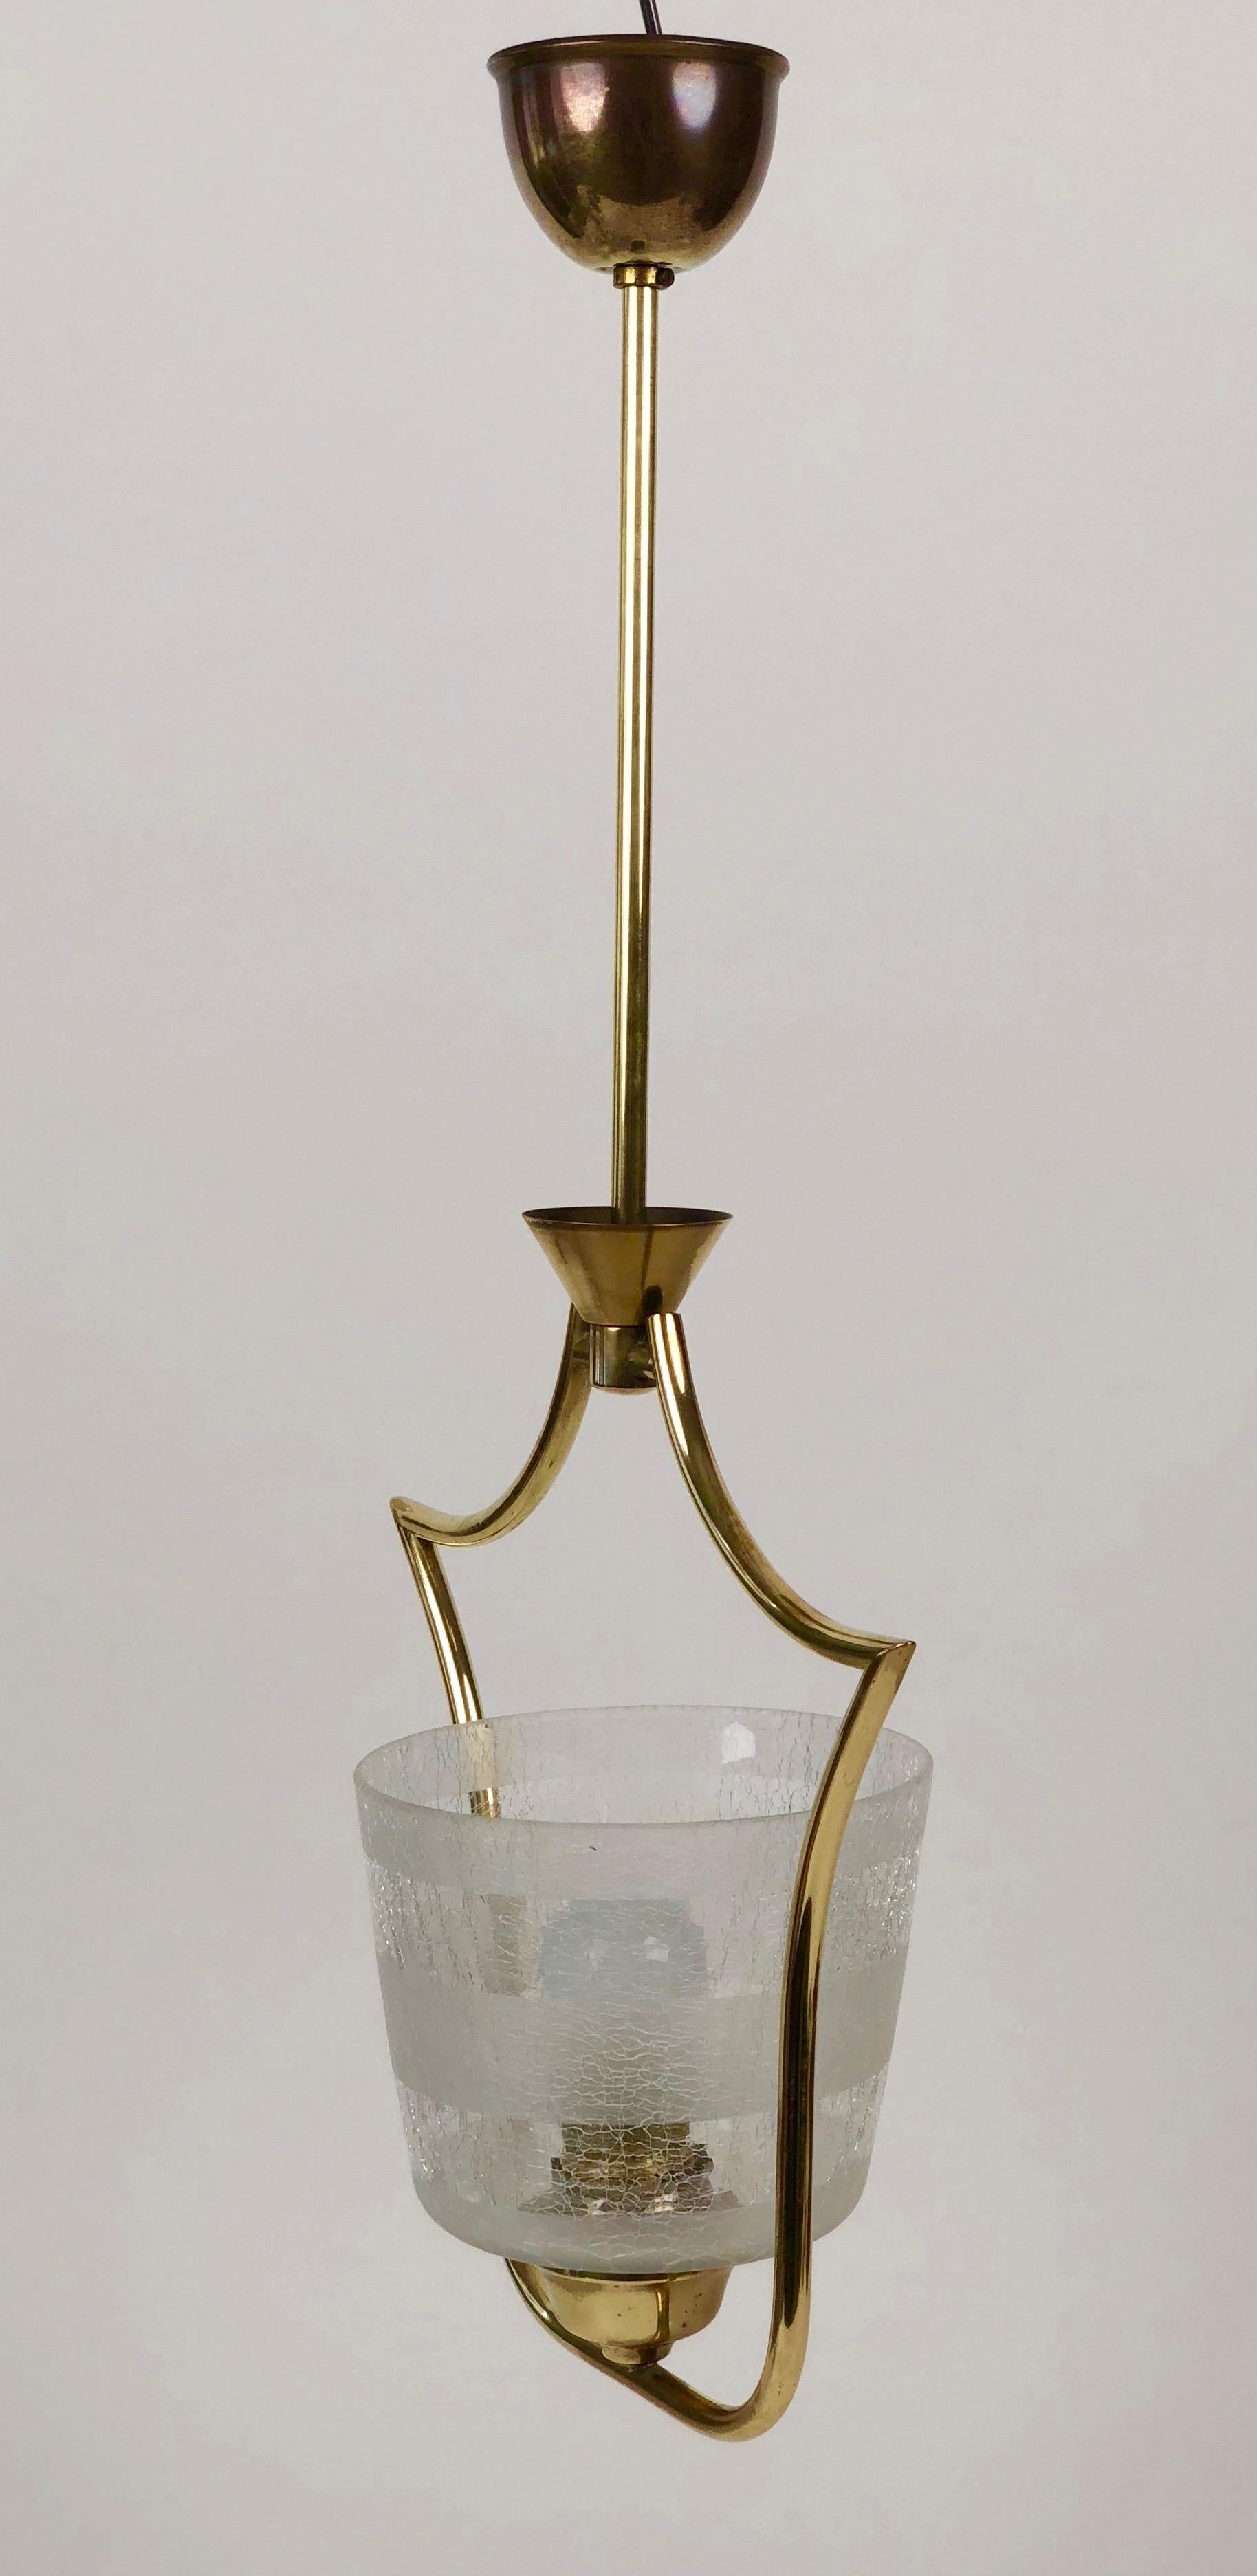 Austrian Hollywood Regency Styled Pendant Lamp in Brass and Glass, from Austria, 1950s For Sale